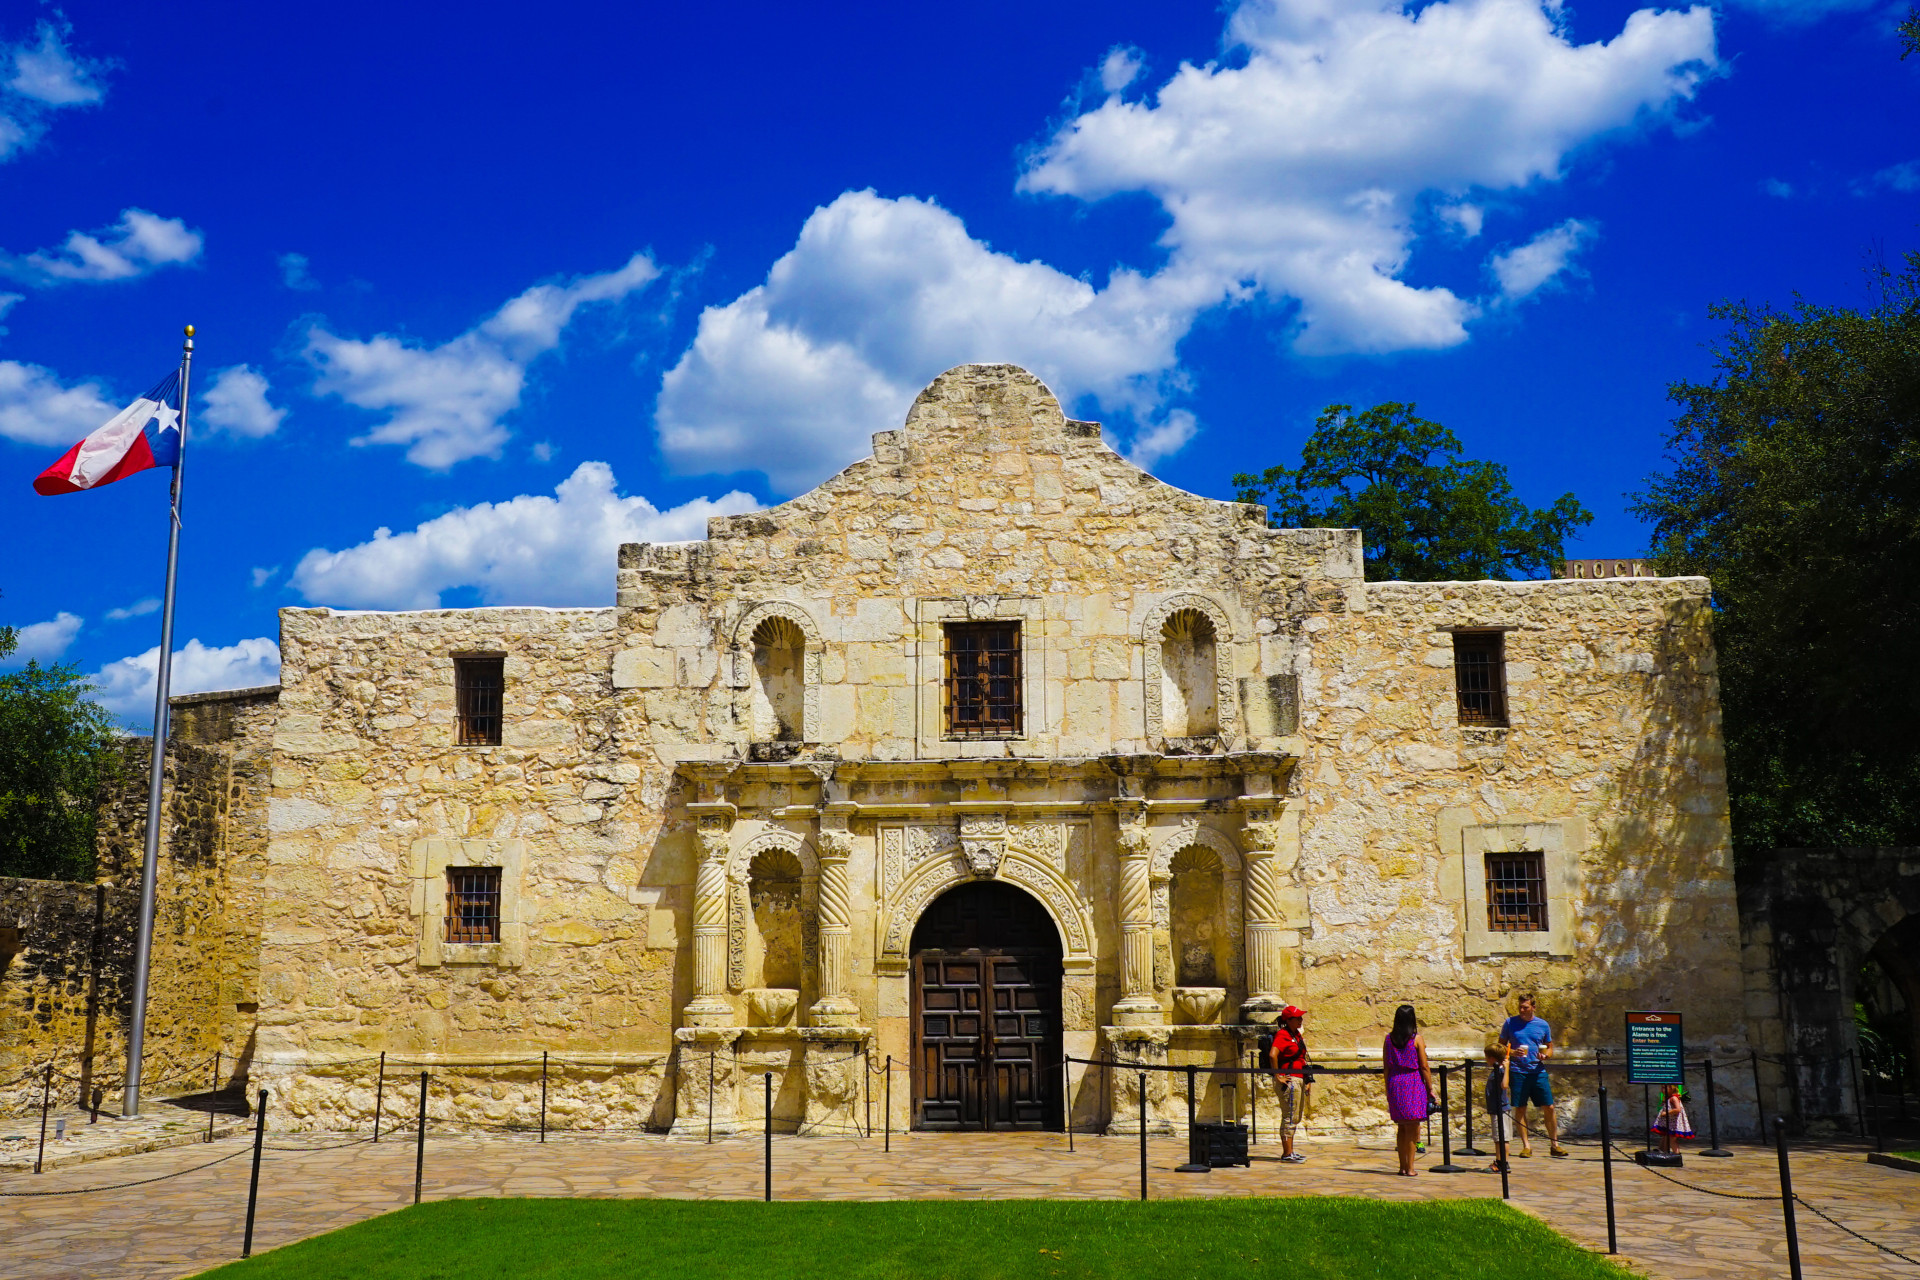 Take a trip to the 18th-century Spanish mission, the Alamo.